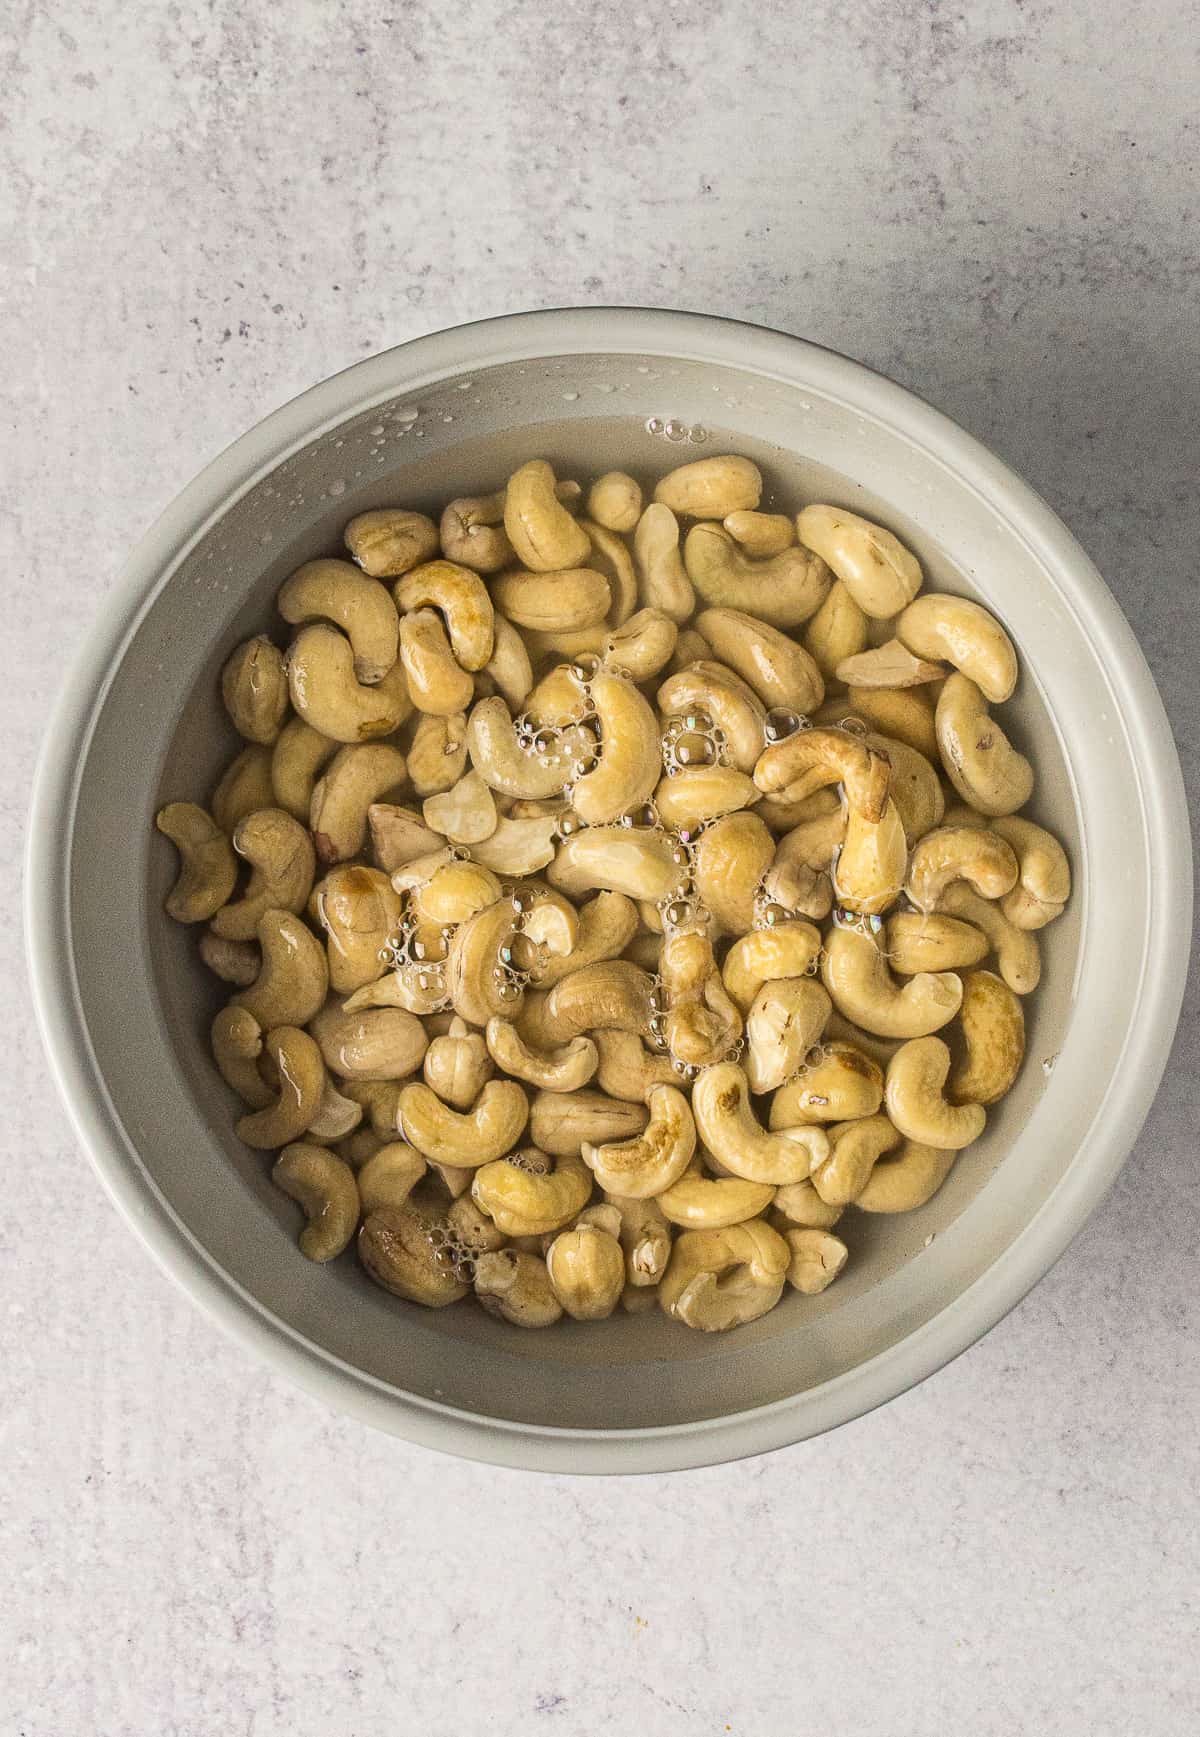 raw cashews soaking in a bowl of water